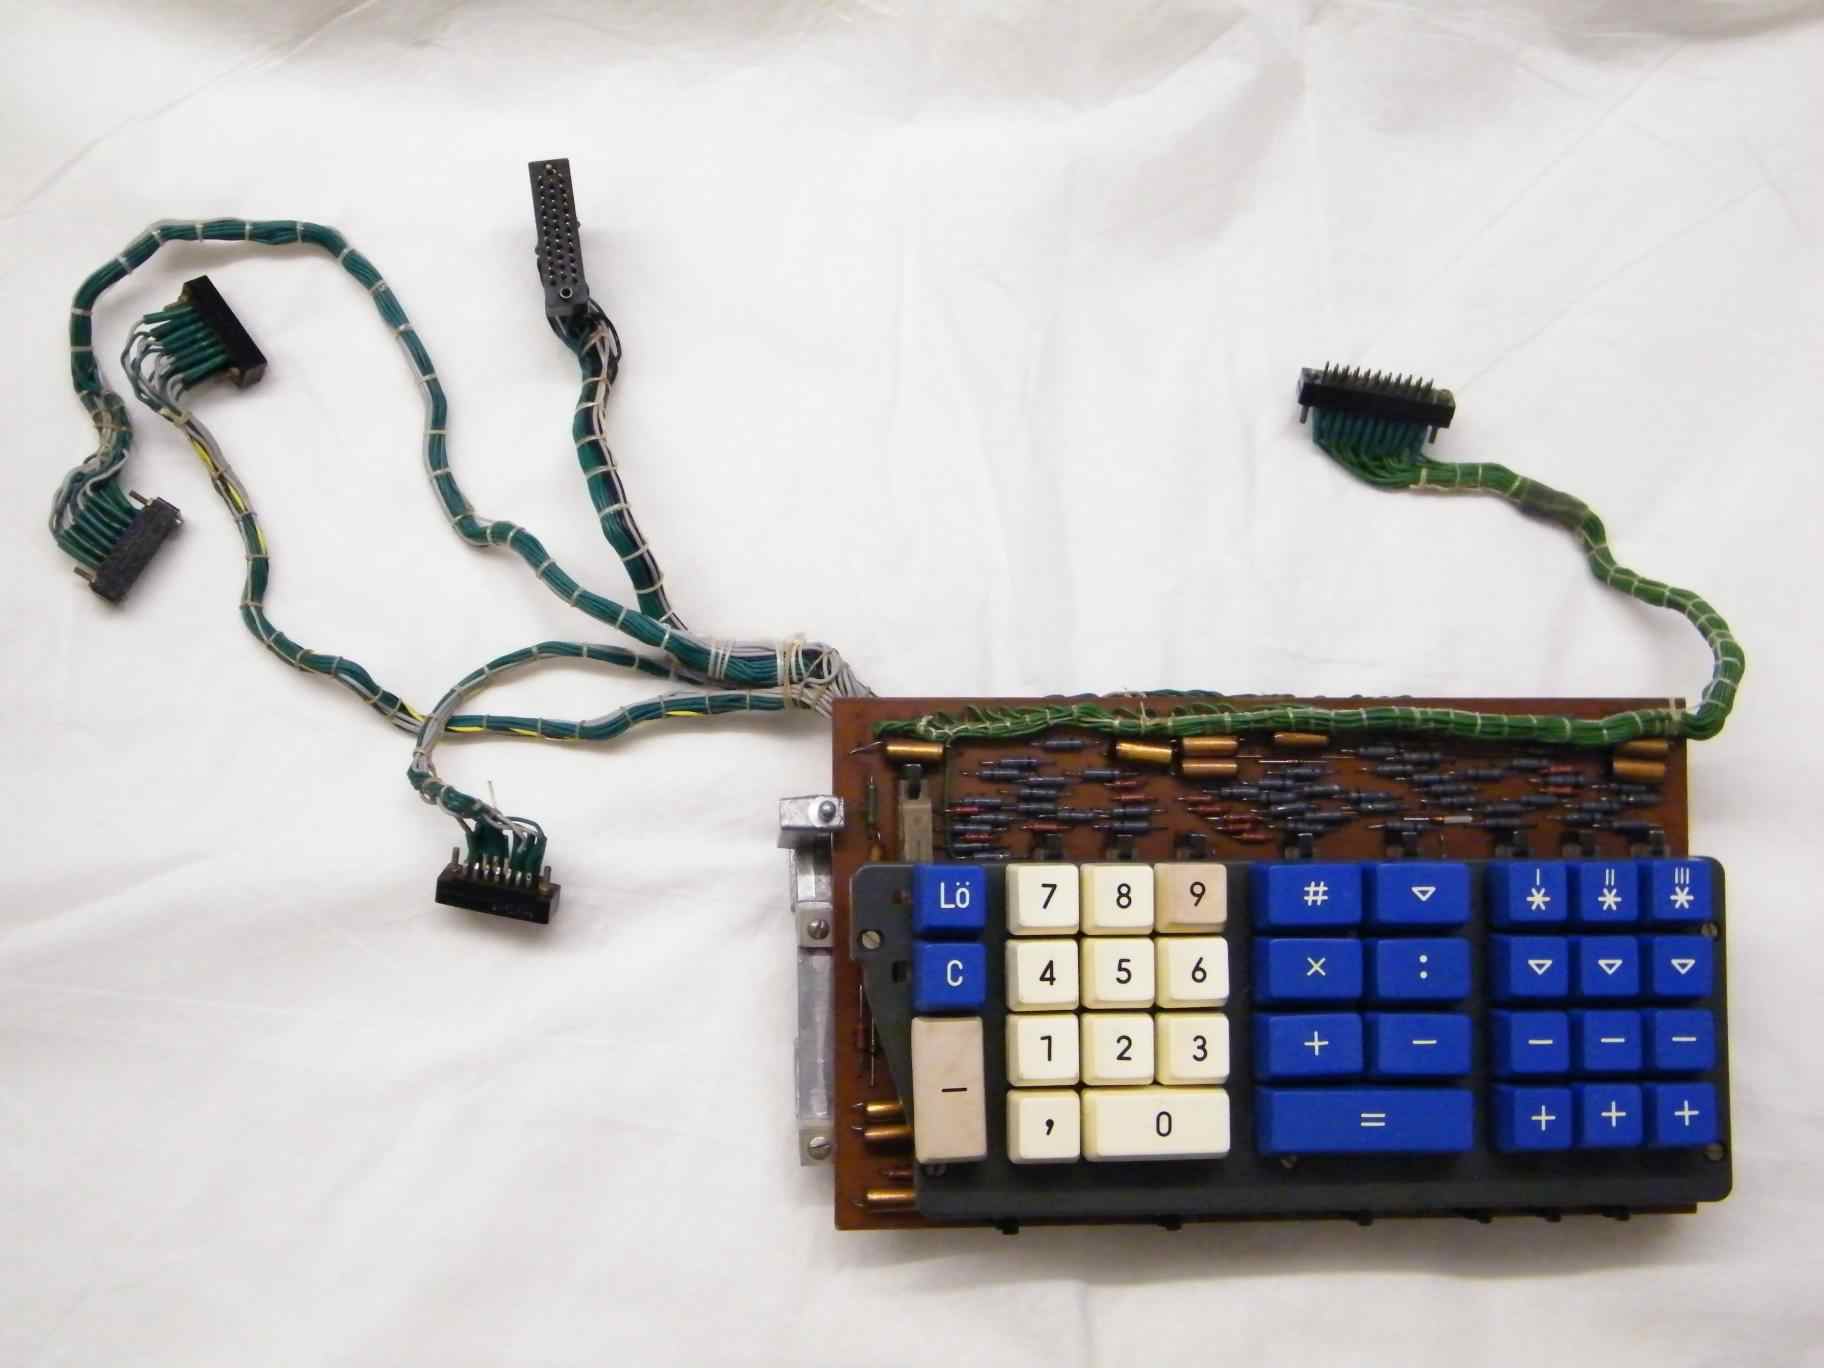 Rebuilt and tested keyboard, click image for a larger version. ©2011 www.soemtron.org